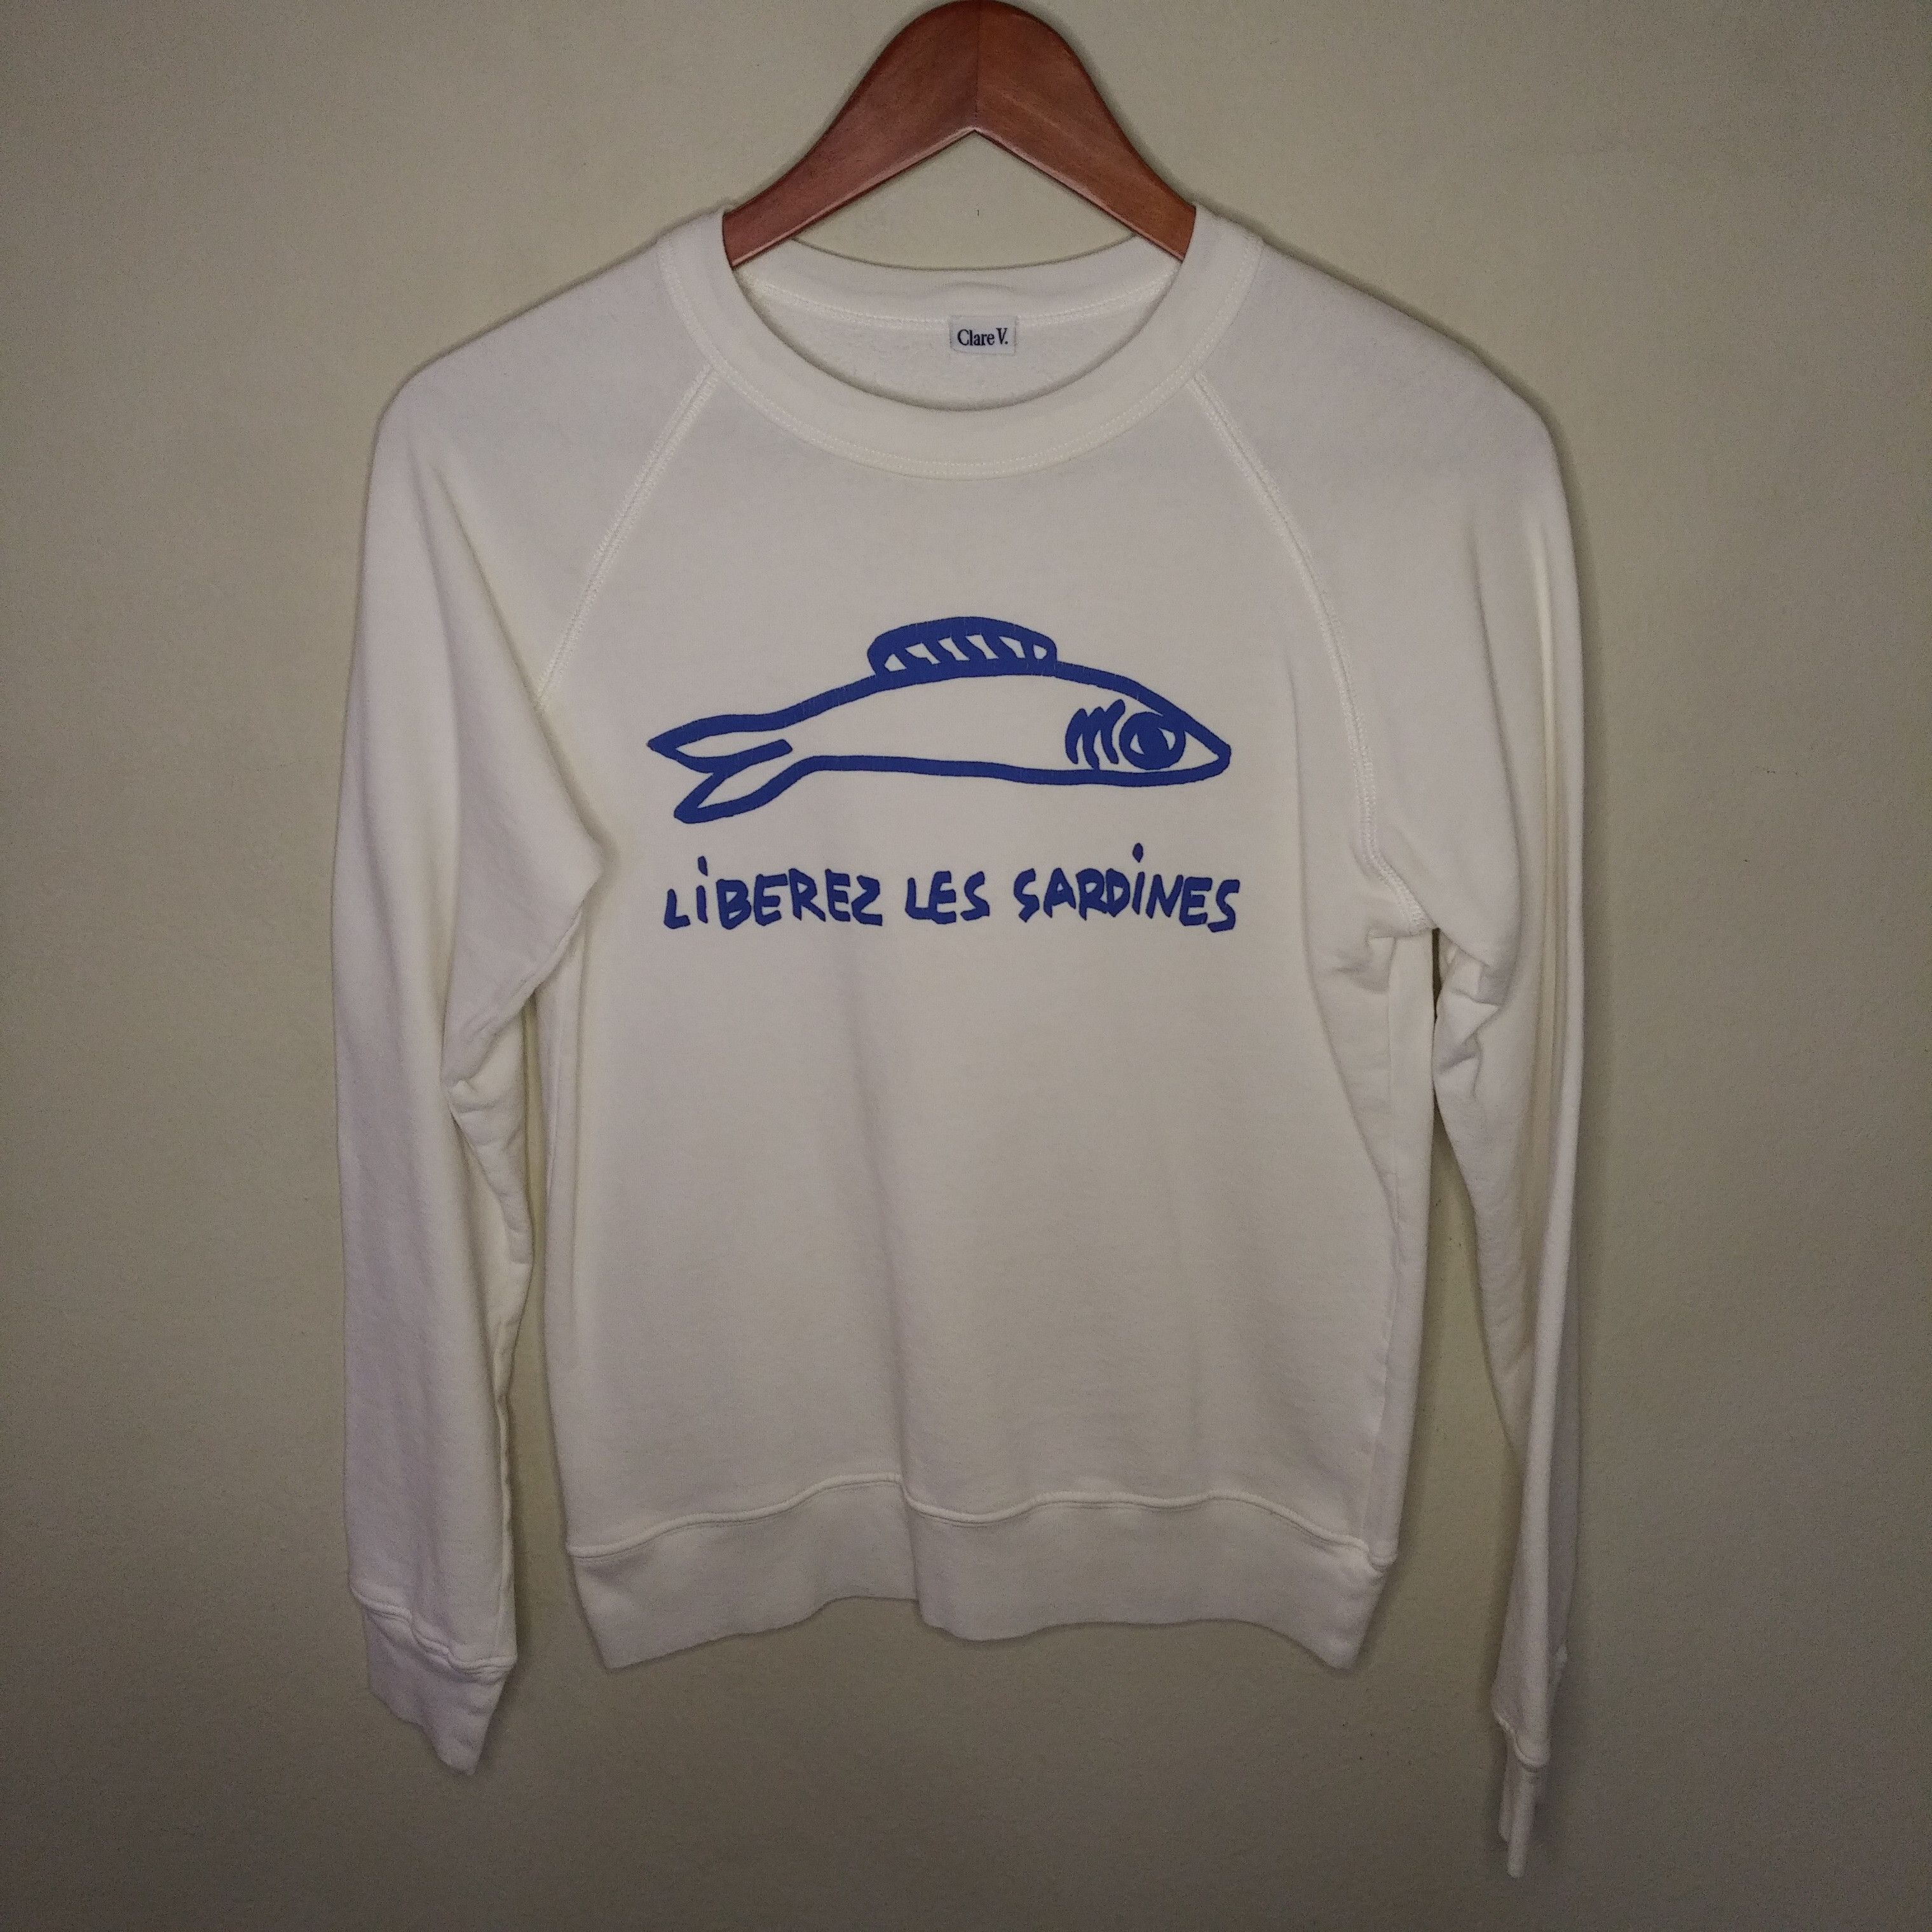 Clare V, Tops, Clare V Sardines Sweatshirt In Excellent Condition